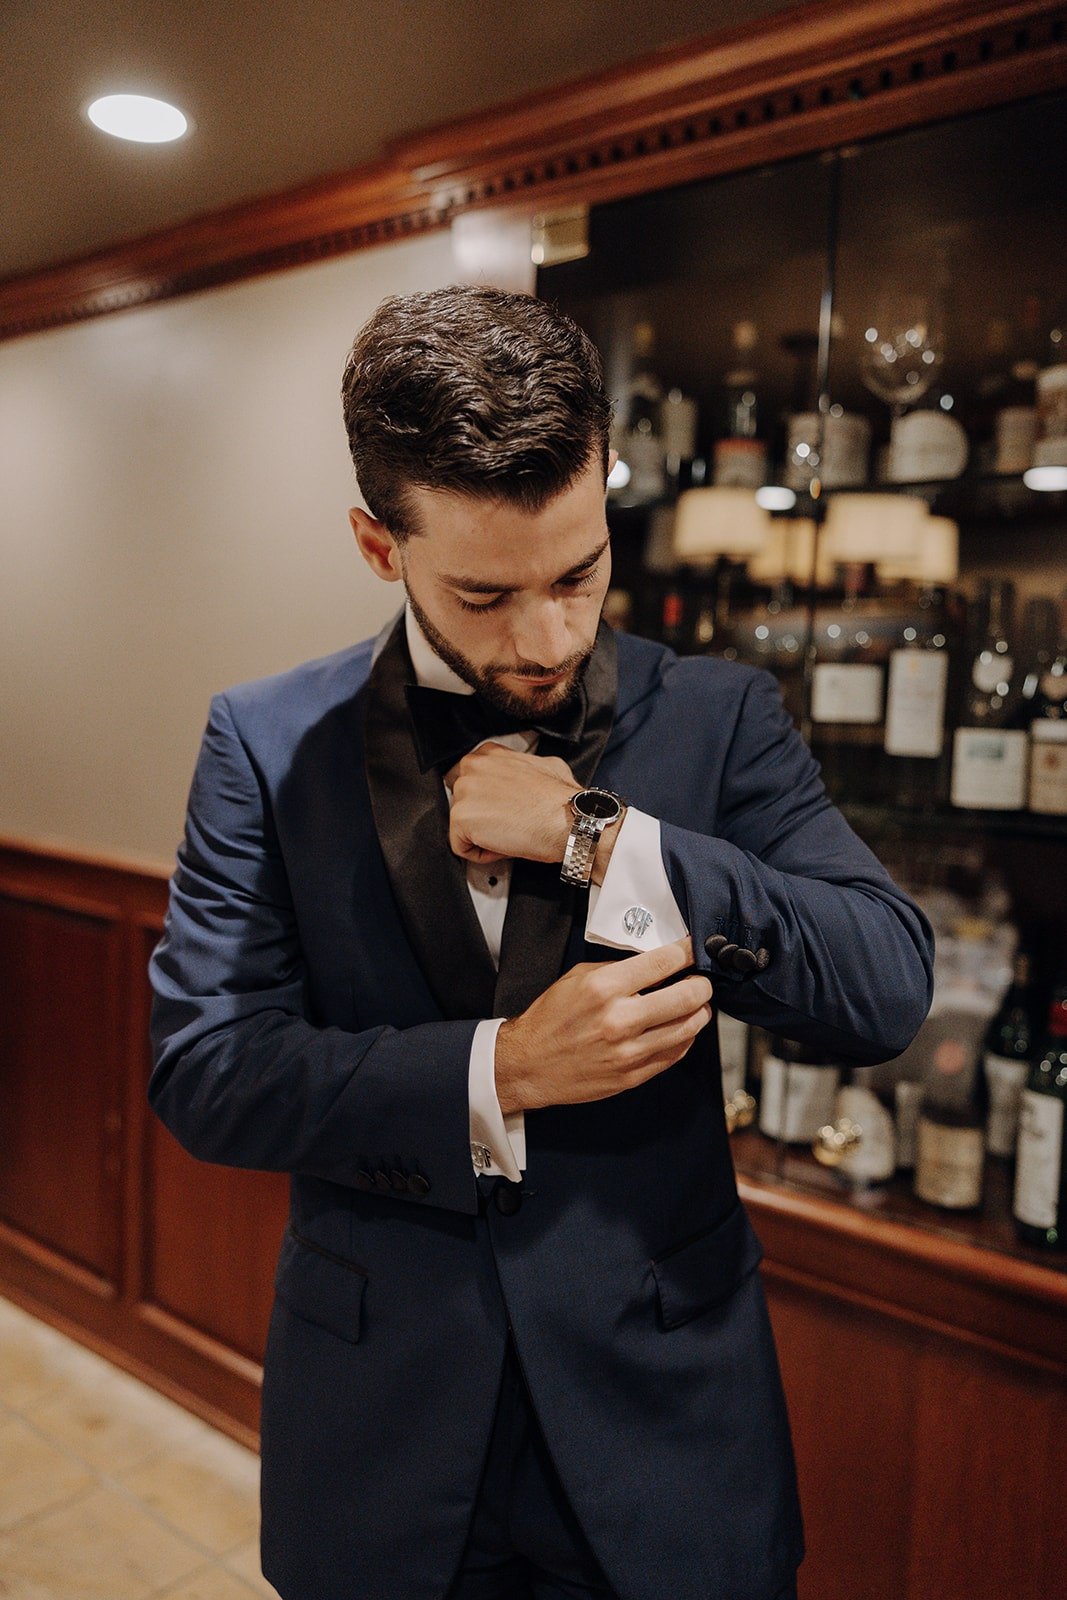 Groom adjusting cuff links while getting ready in the wine cellar at Kittle House wedding venue